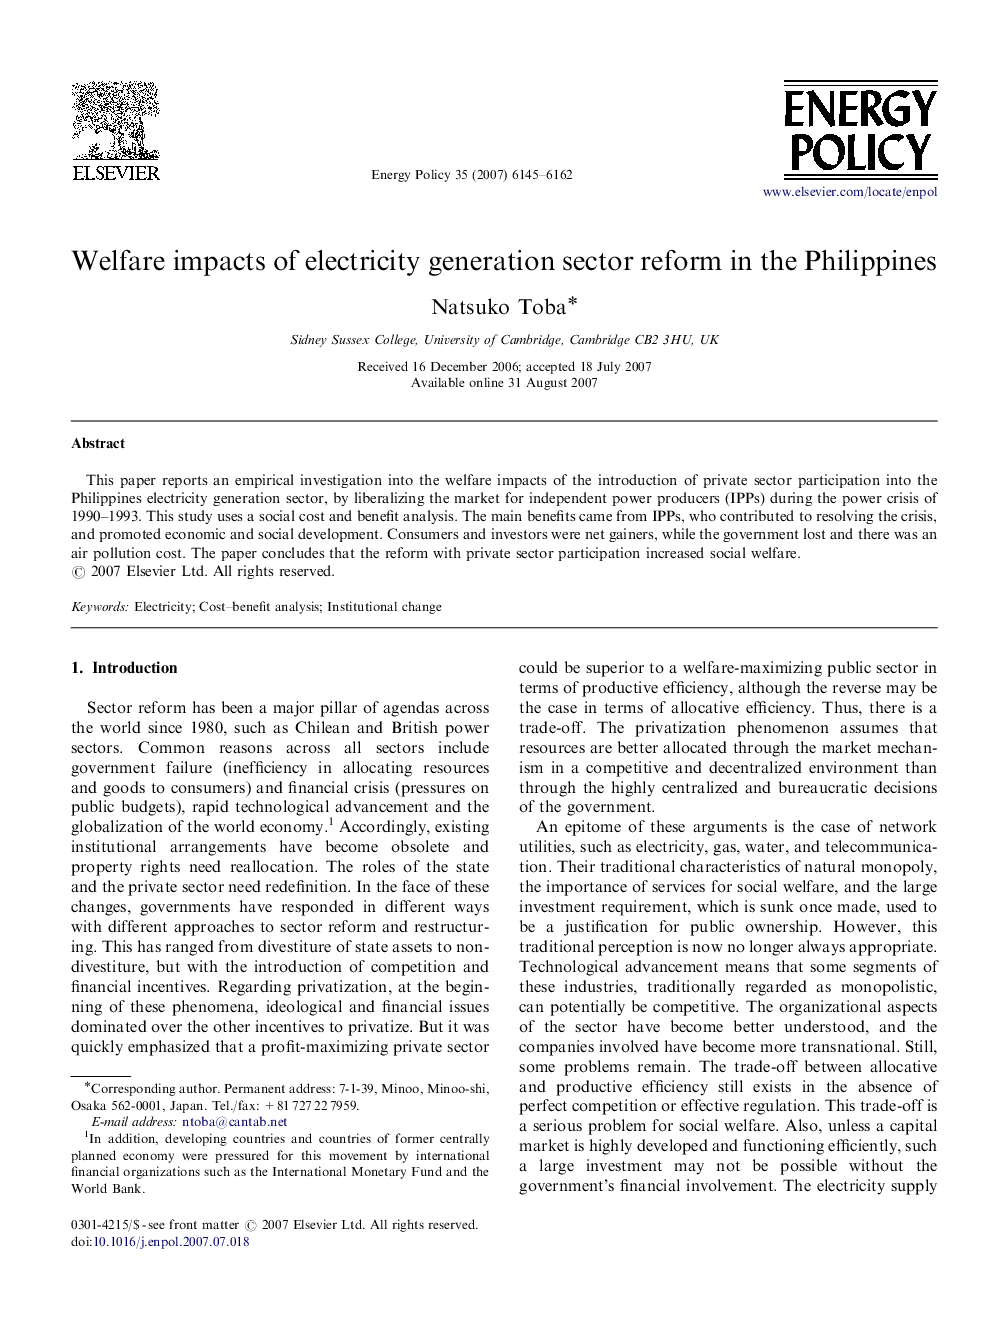 Welfare impacts of electricity generation sector reform in the Philippines